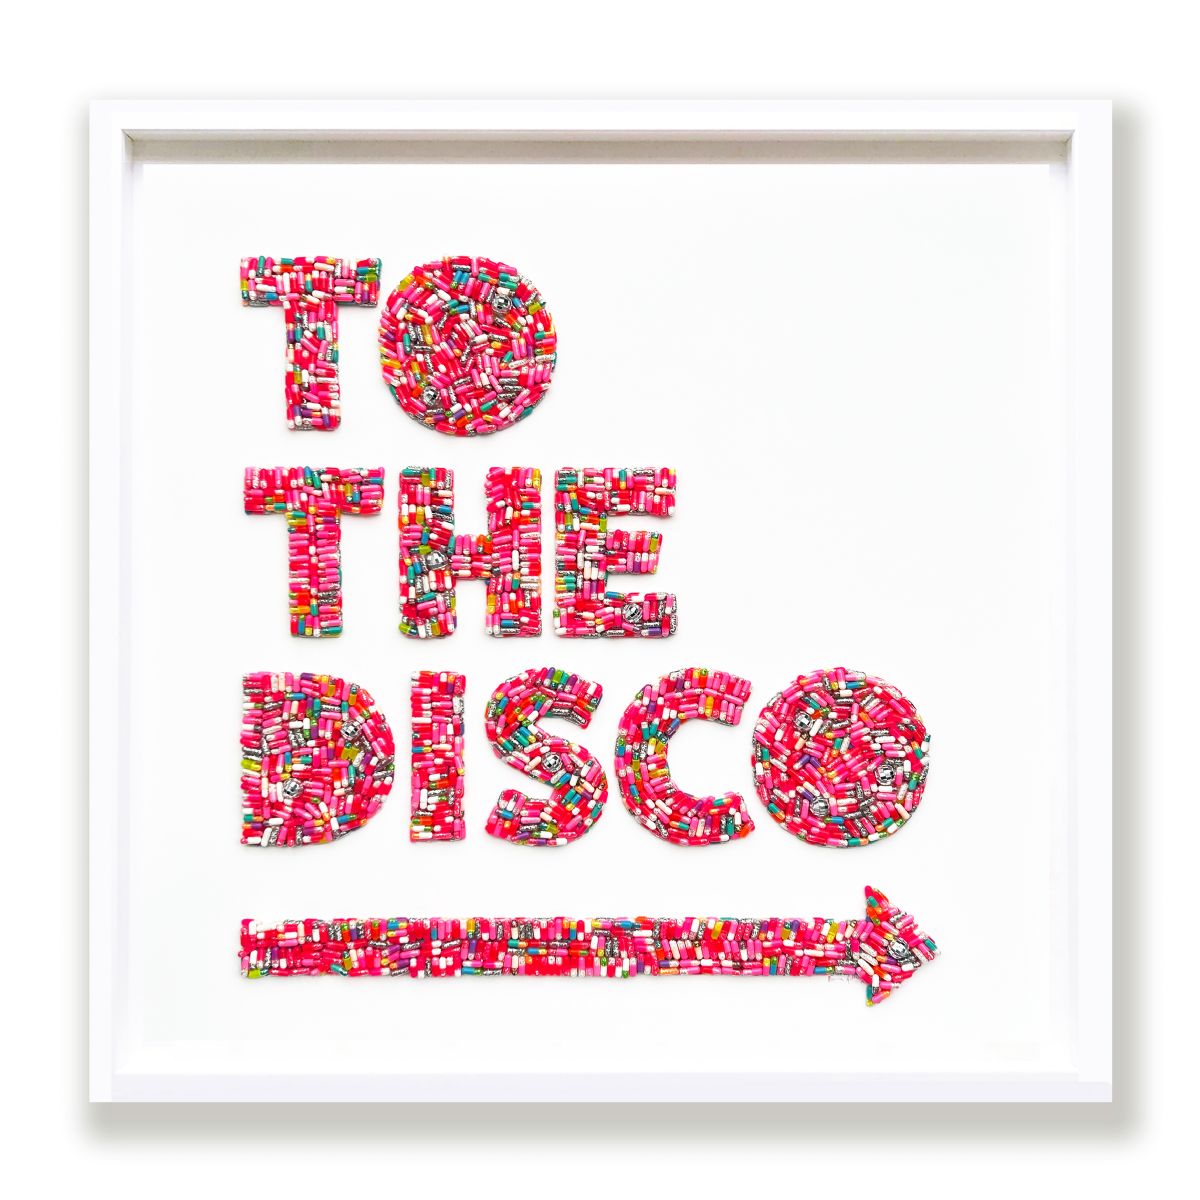 To The Disco by Emma Gibbons